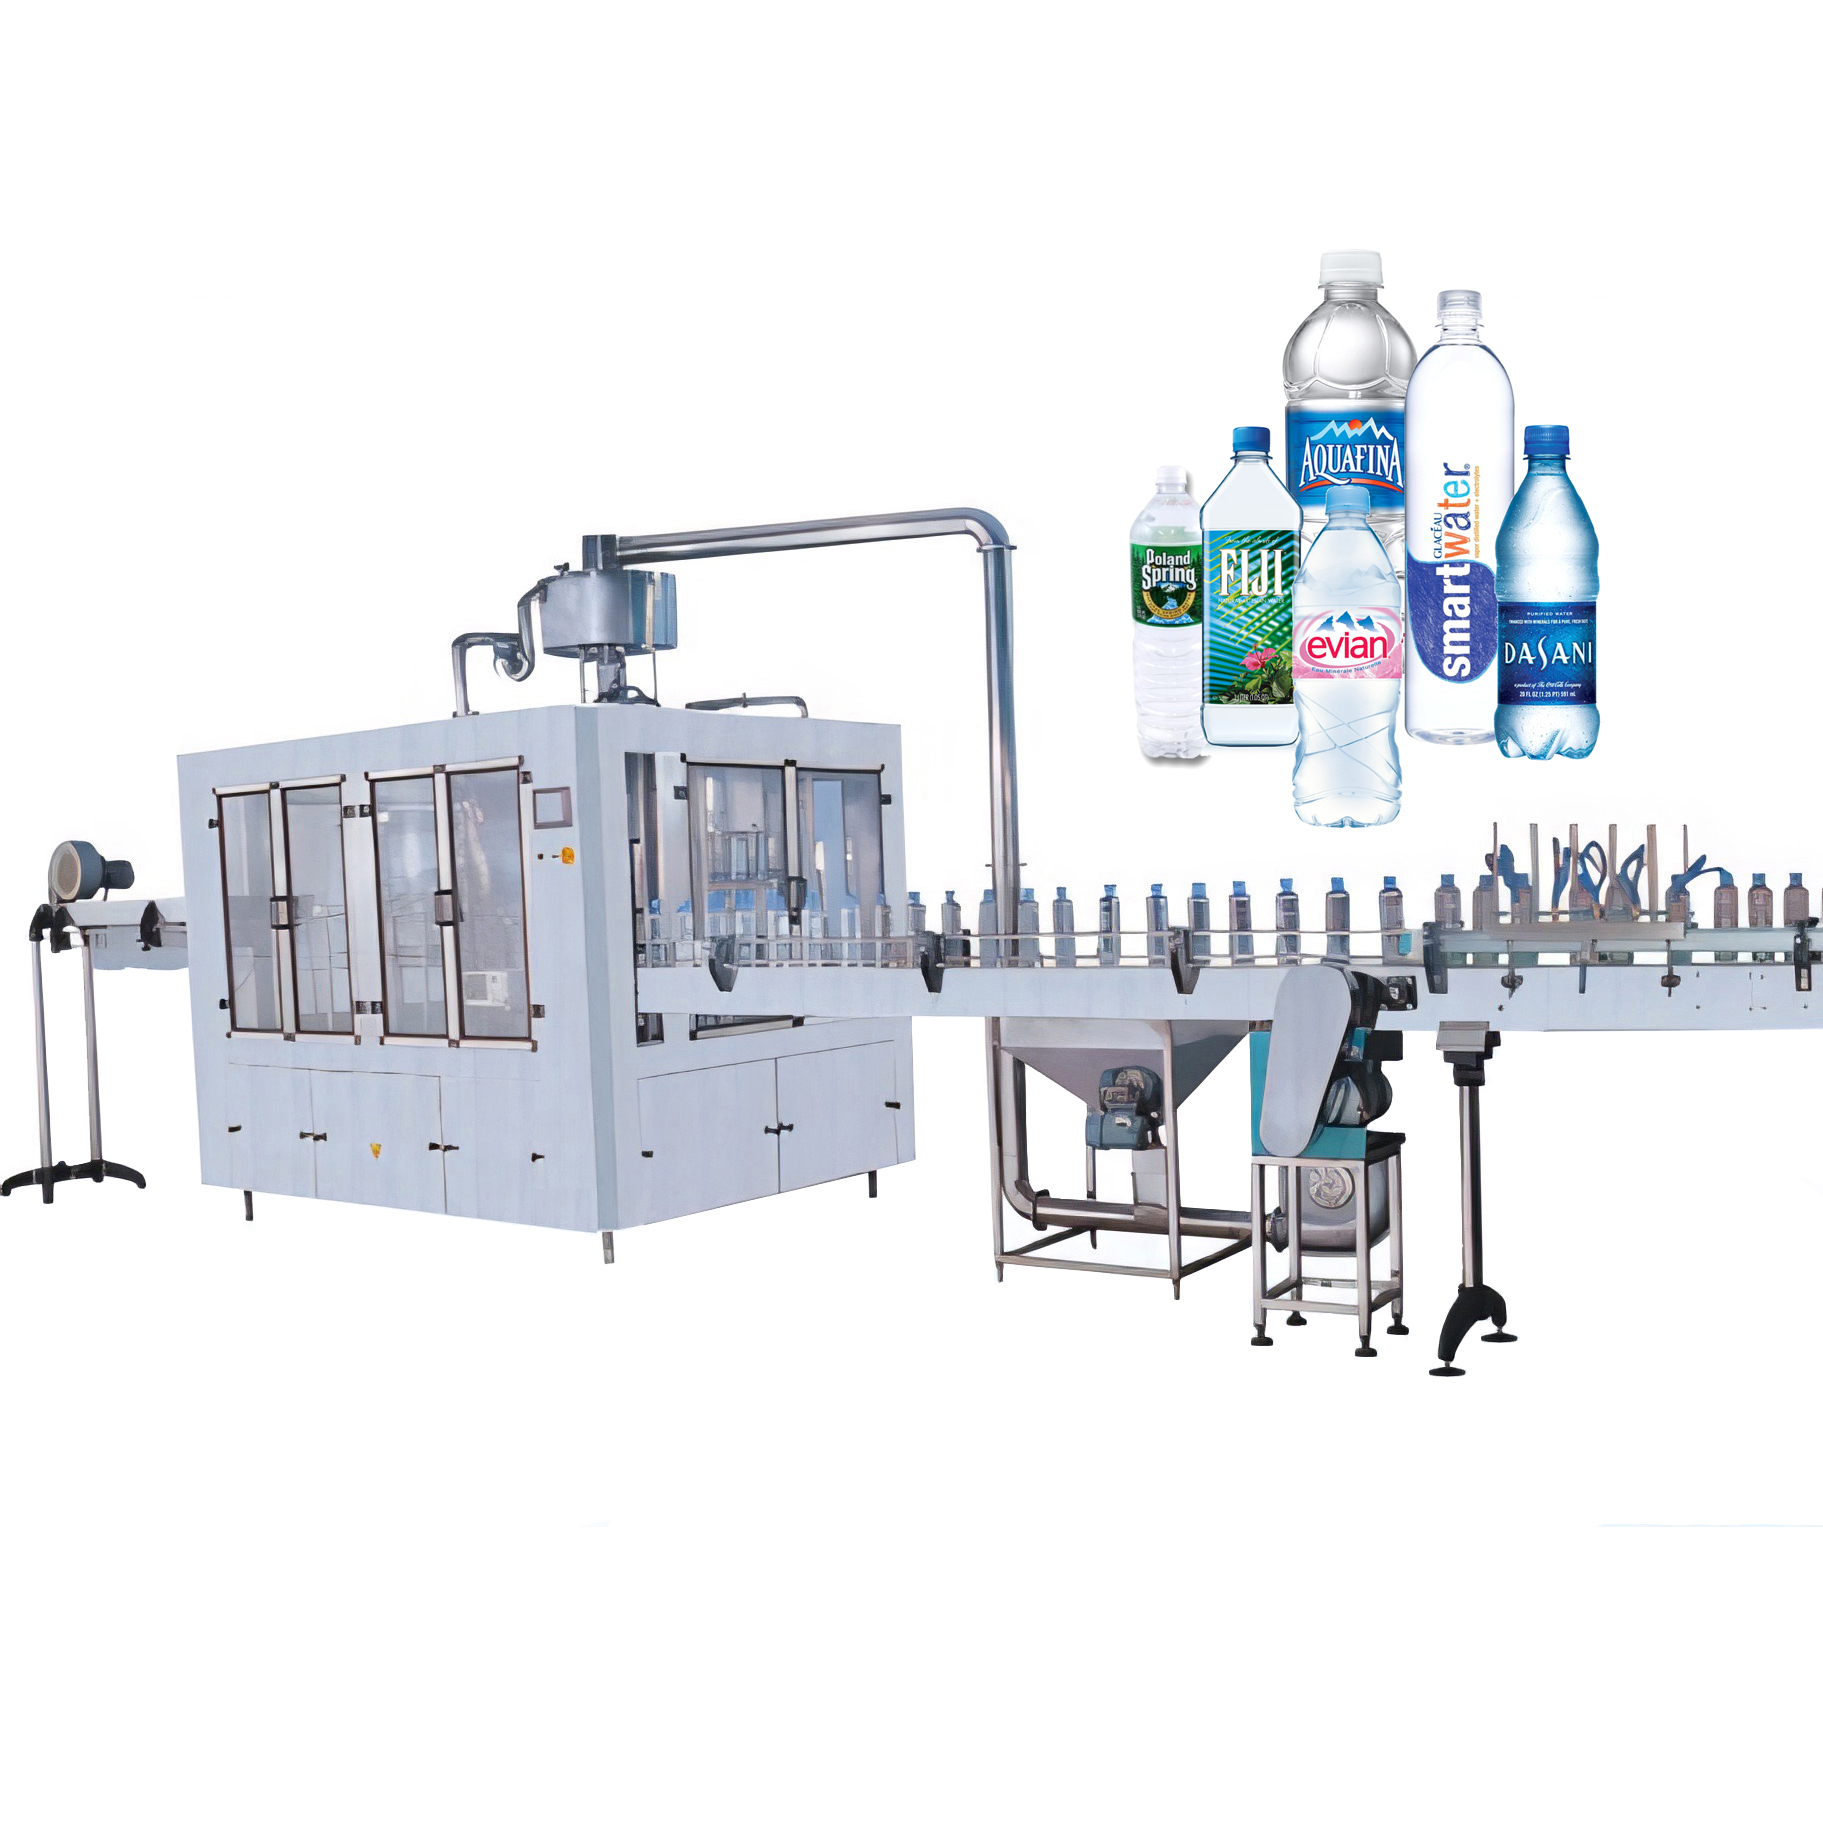 16-12-6 Rotary Water Bottling Machine for washing filling and capping bottled water